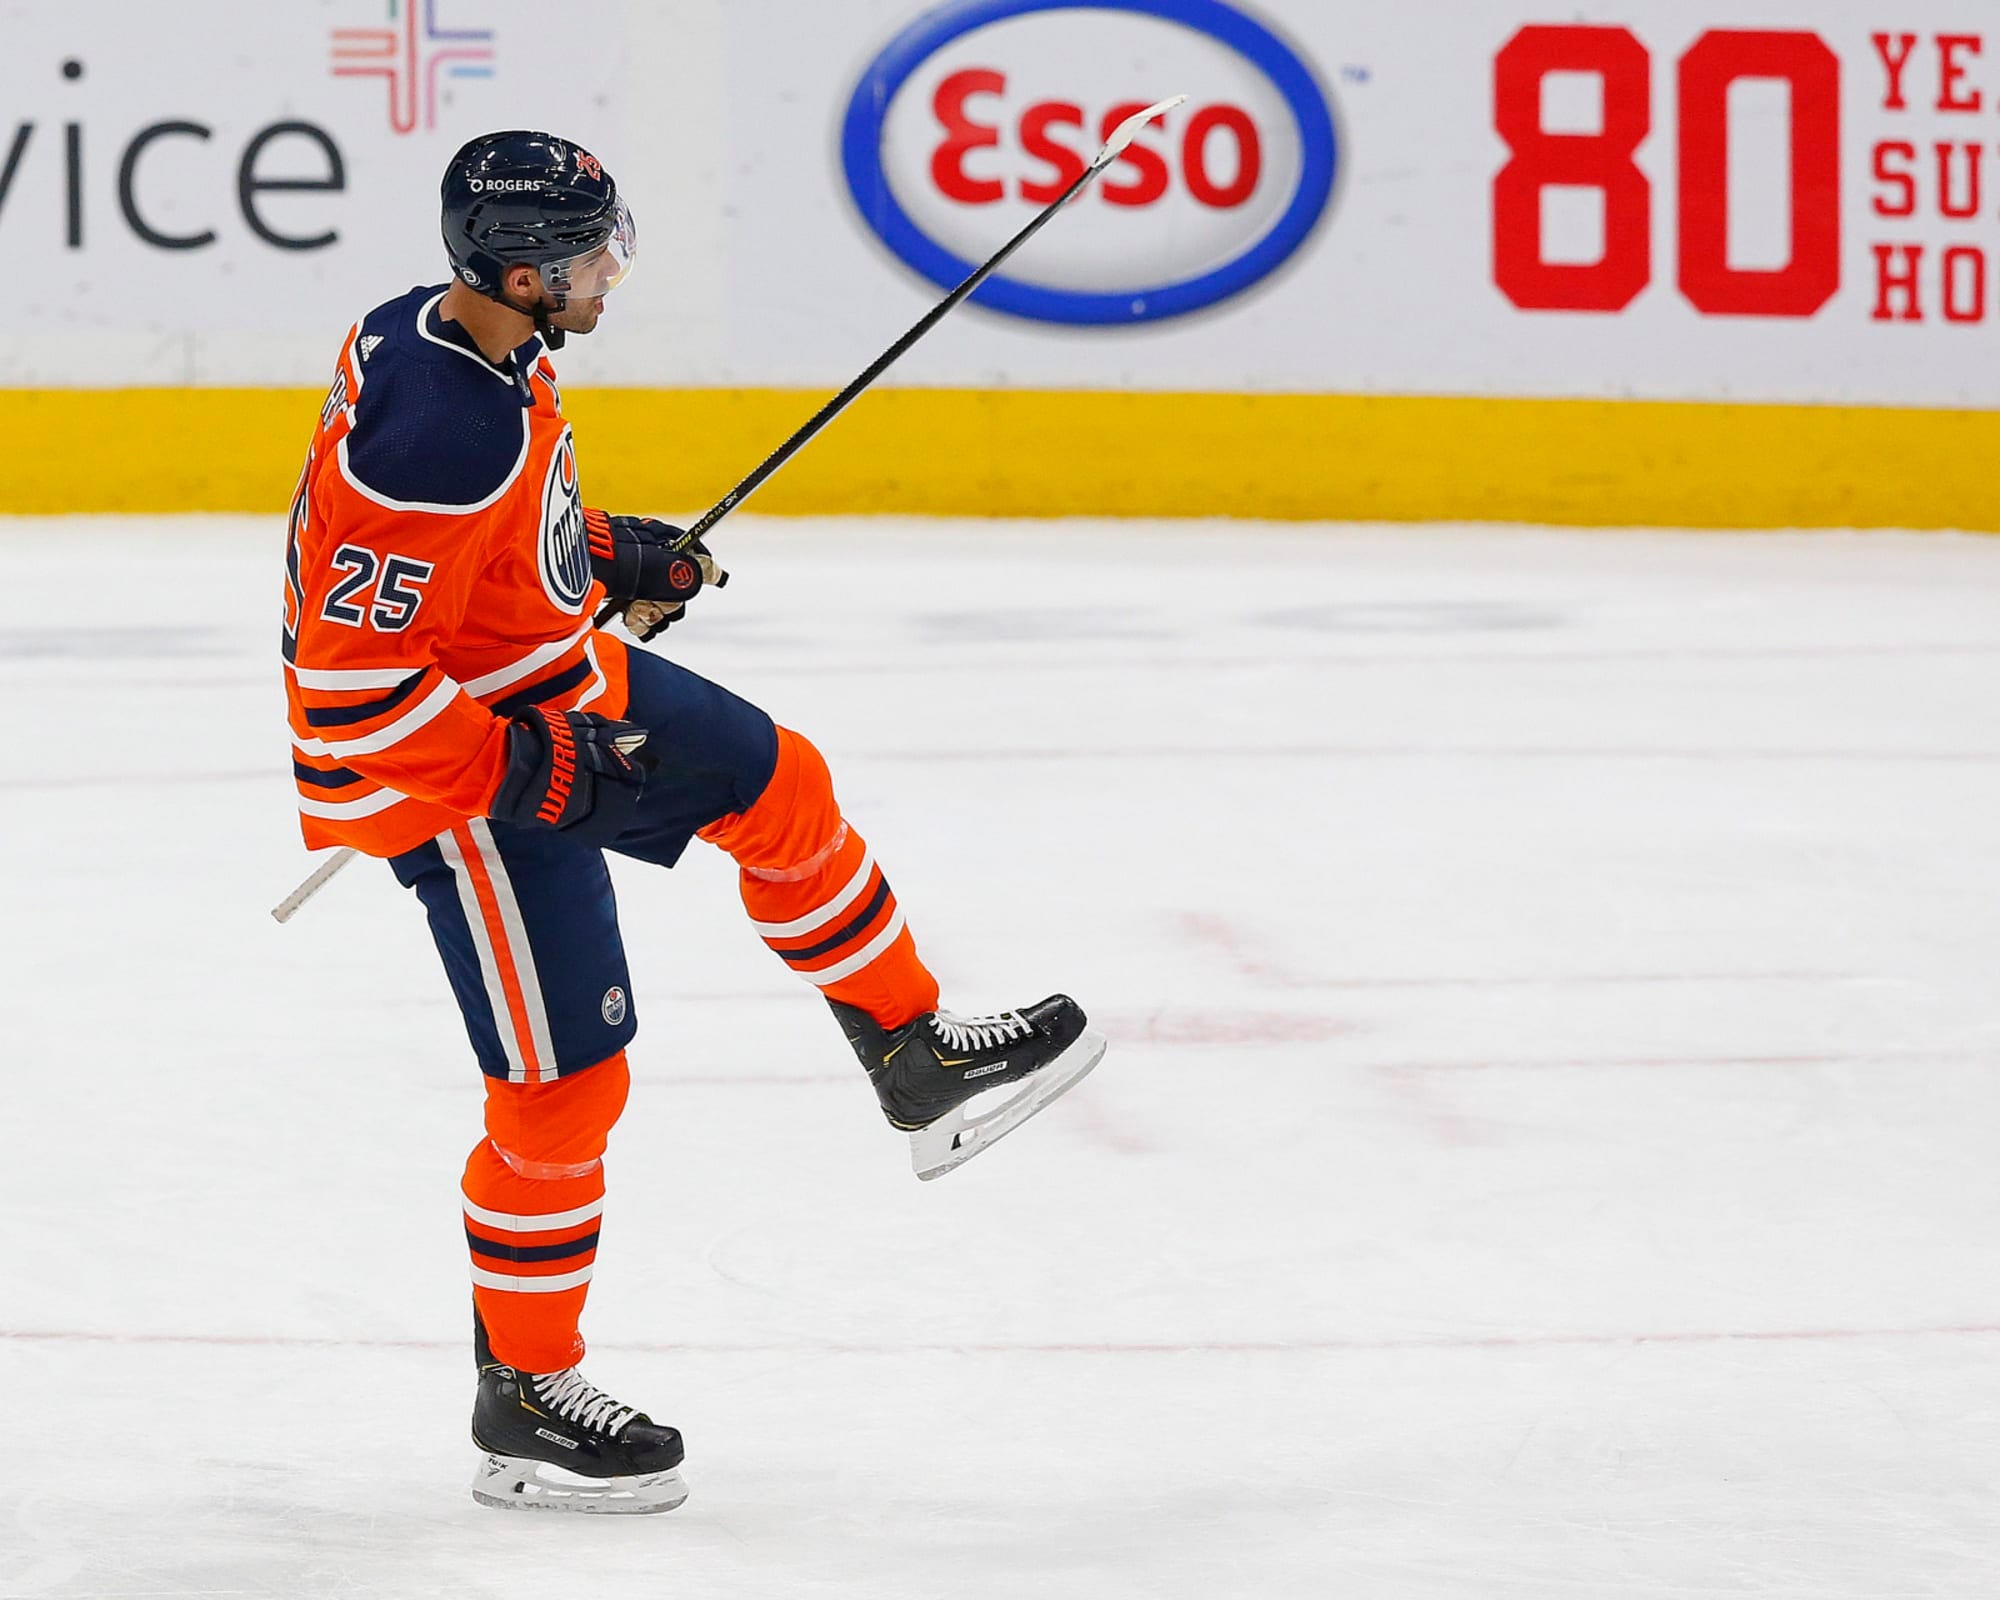 Darnell Nurse Hockey Stats and Profile at